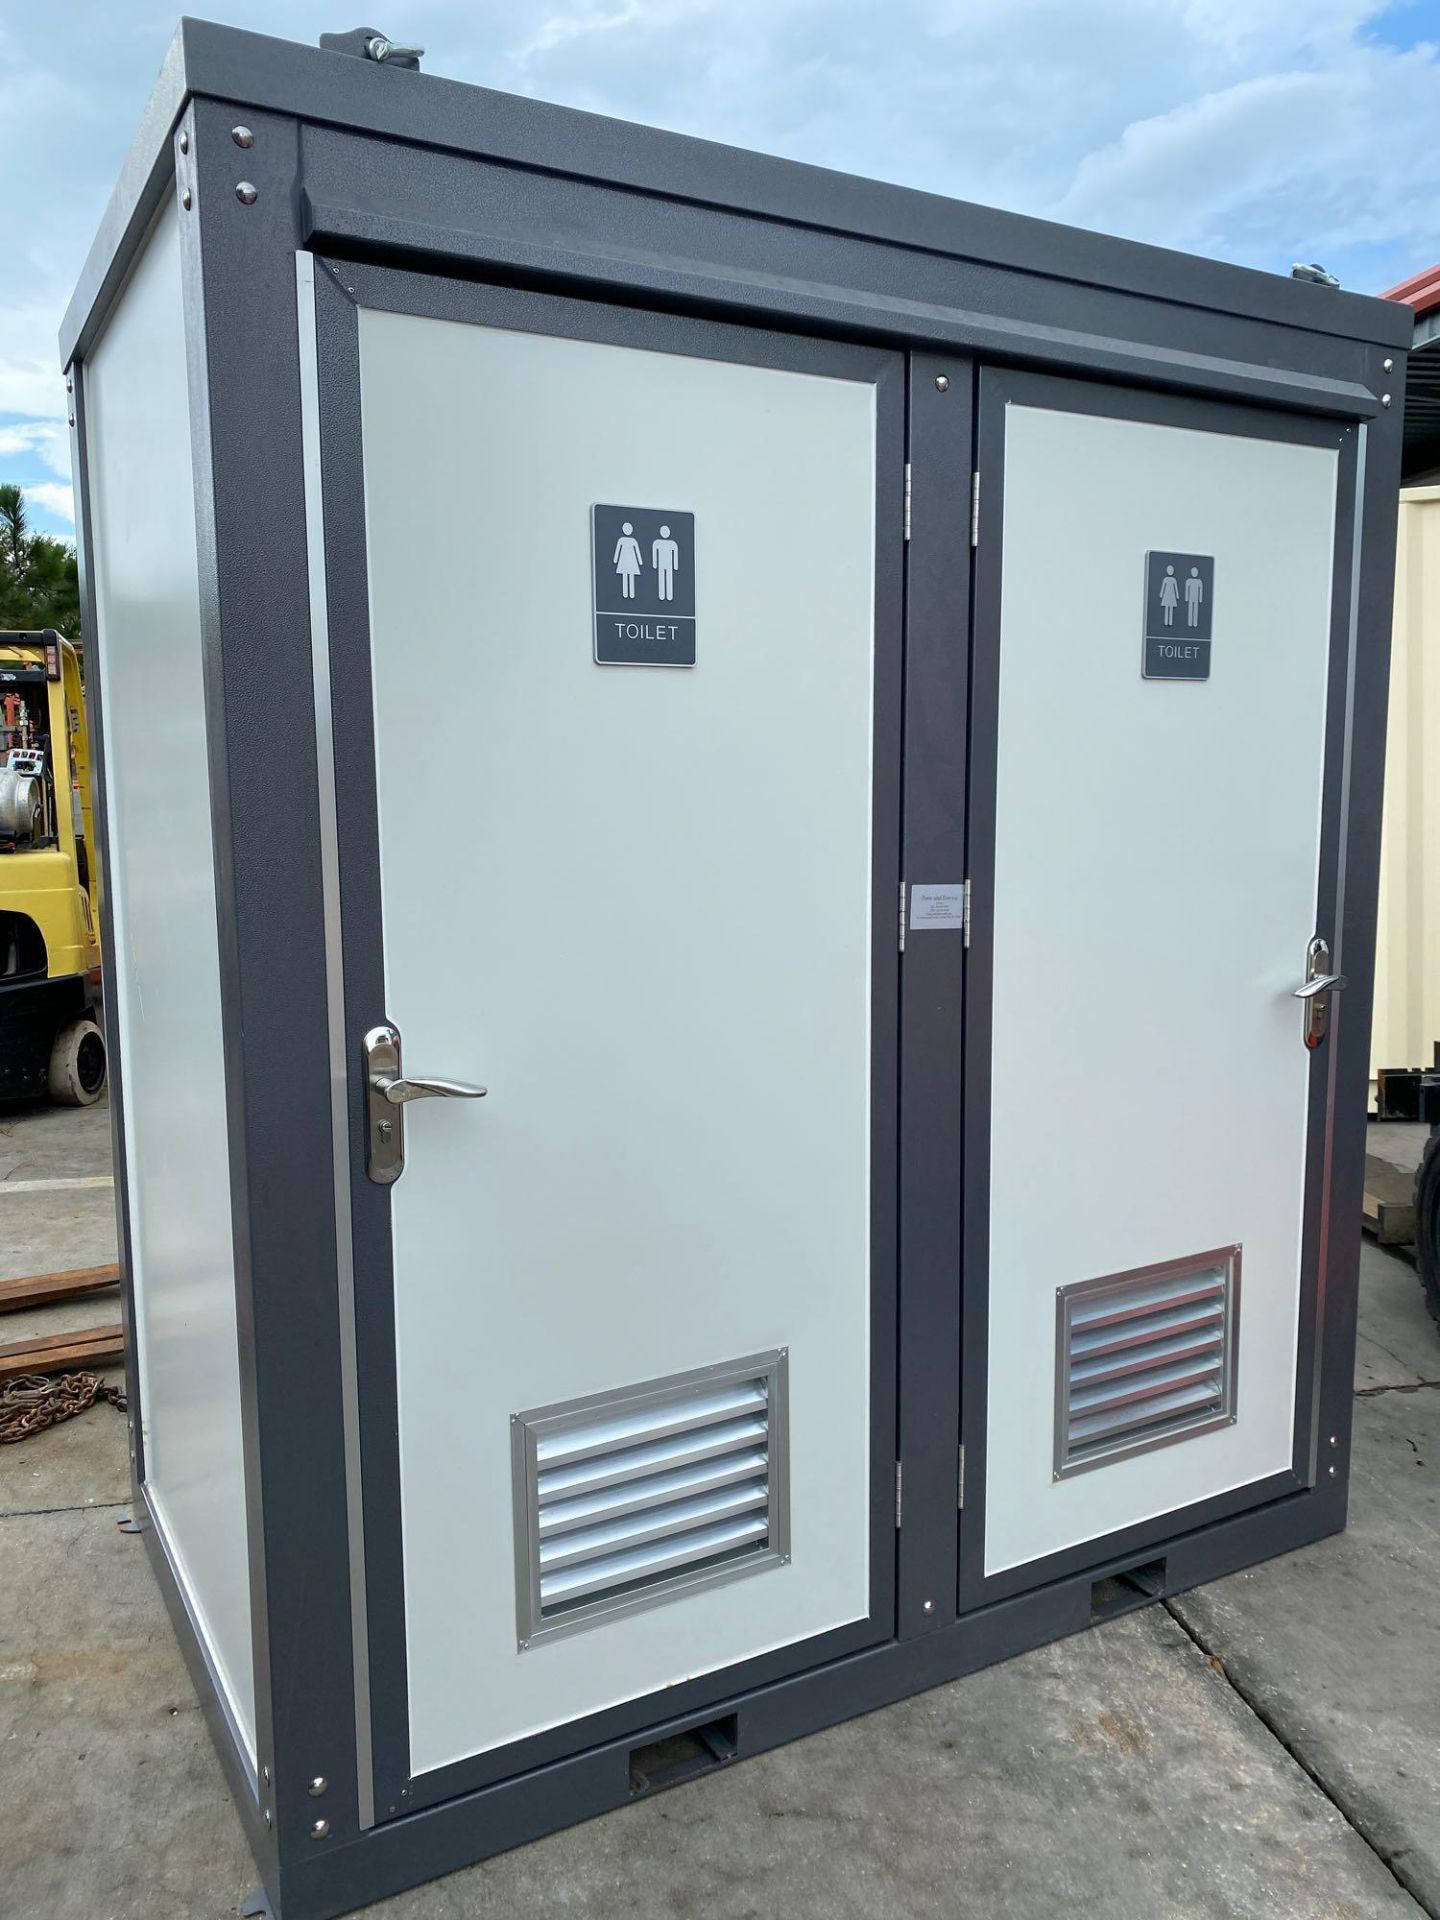 UNUSED PORTABLE 2 STALL BATHROOM UNIT. PLUMBING AND ELECTRIC HOOKUP, FORK POCKETS